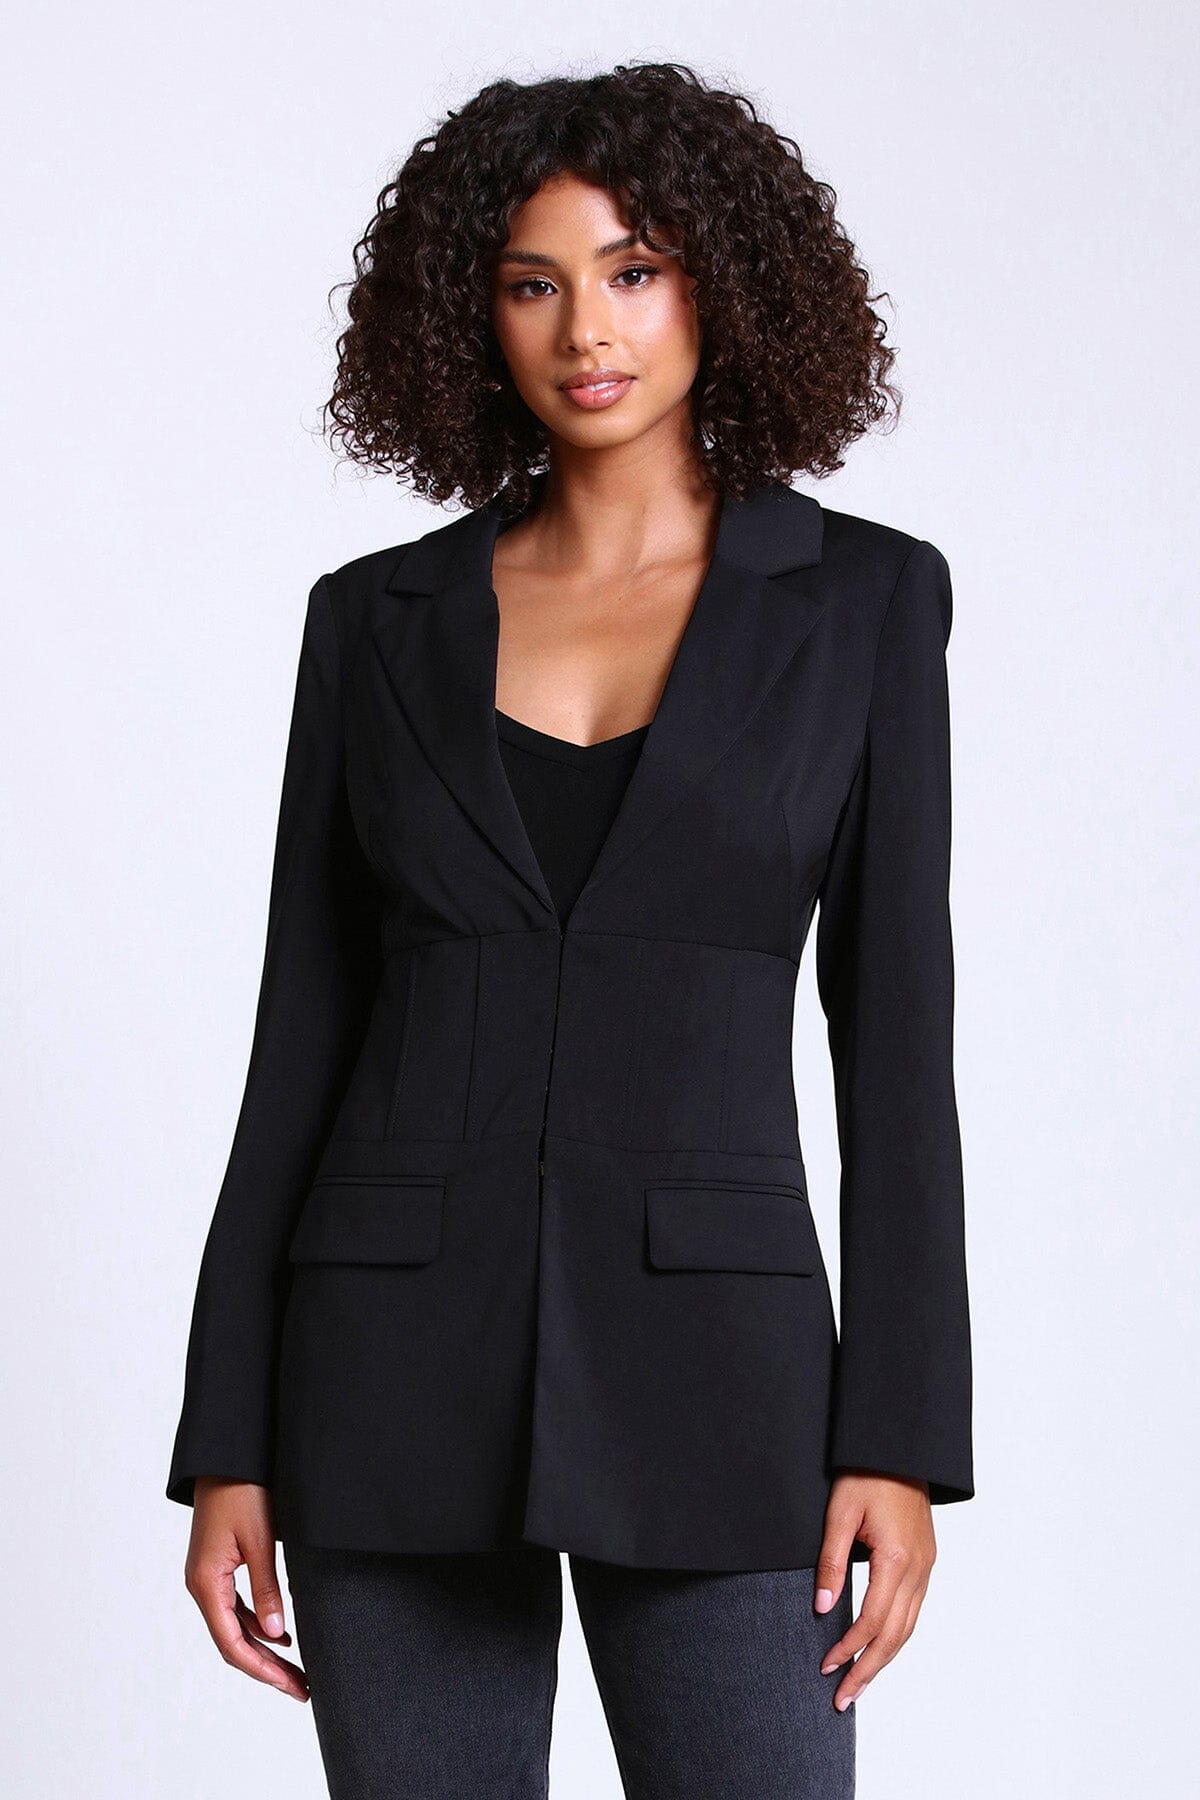 black tailored corset fitted cinched blazer jacket - figure flattering work appropriate blazers jackets outerwear for women